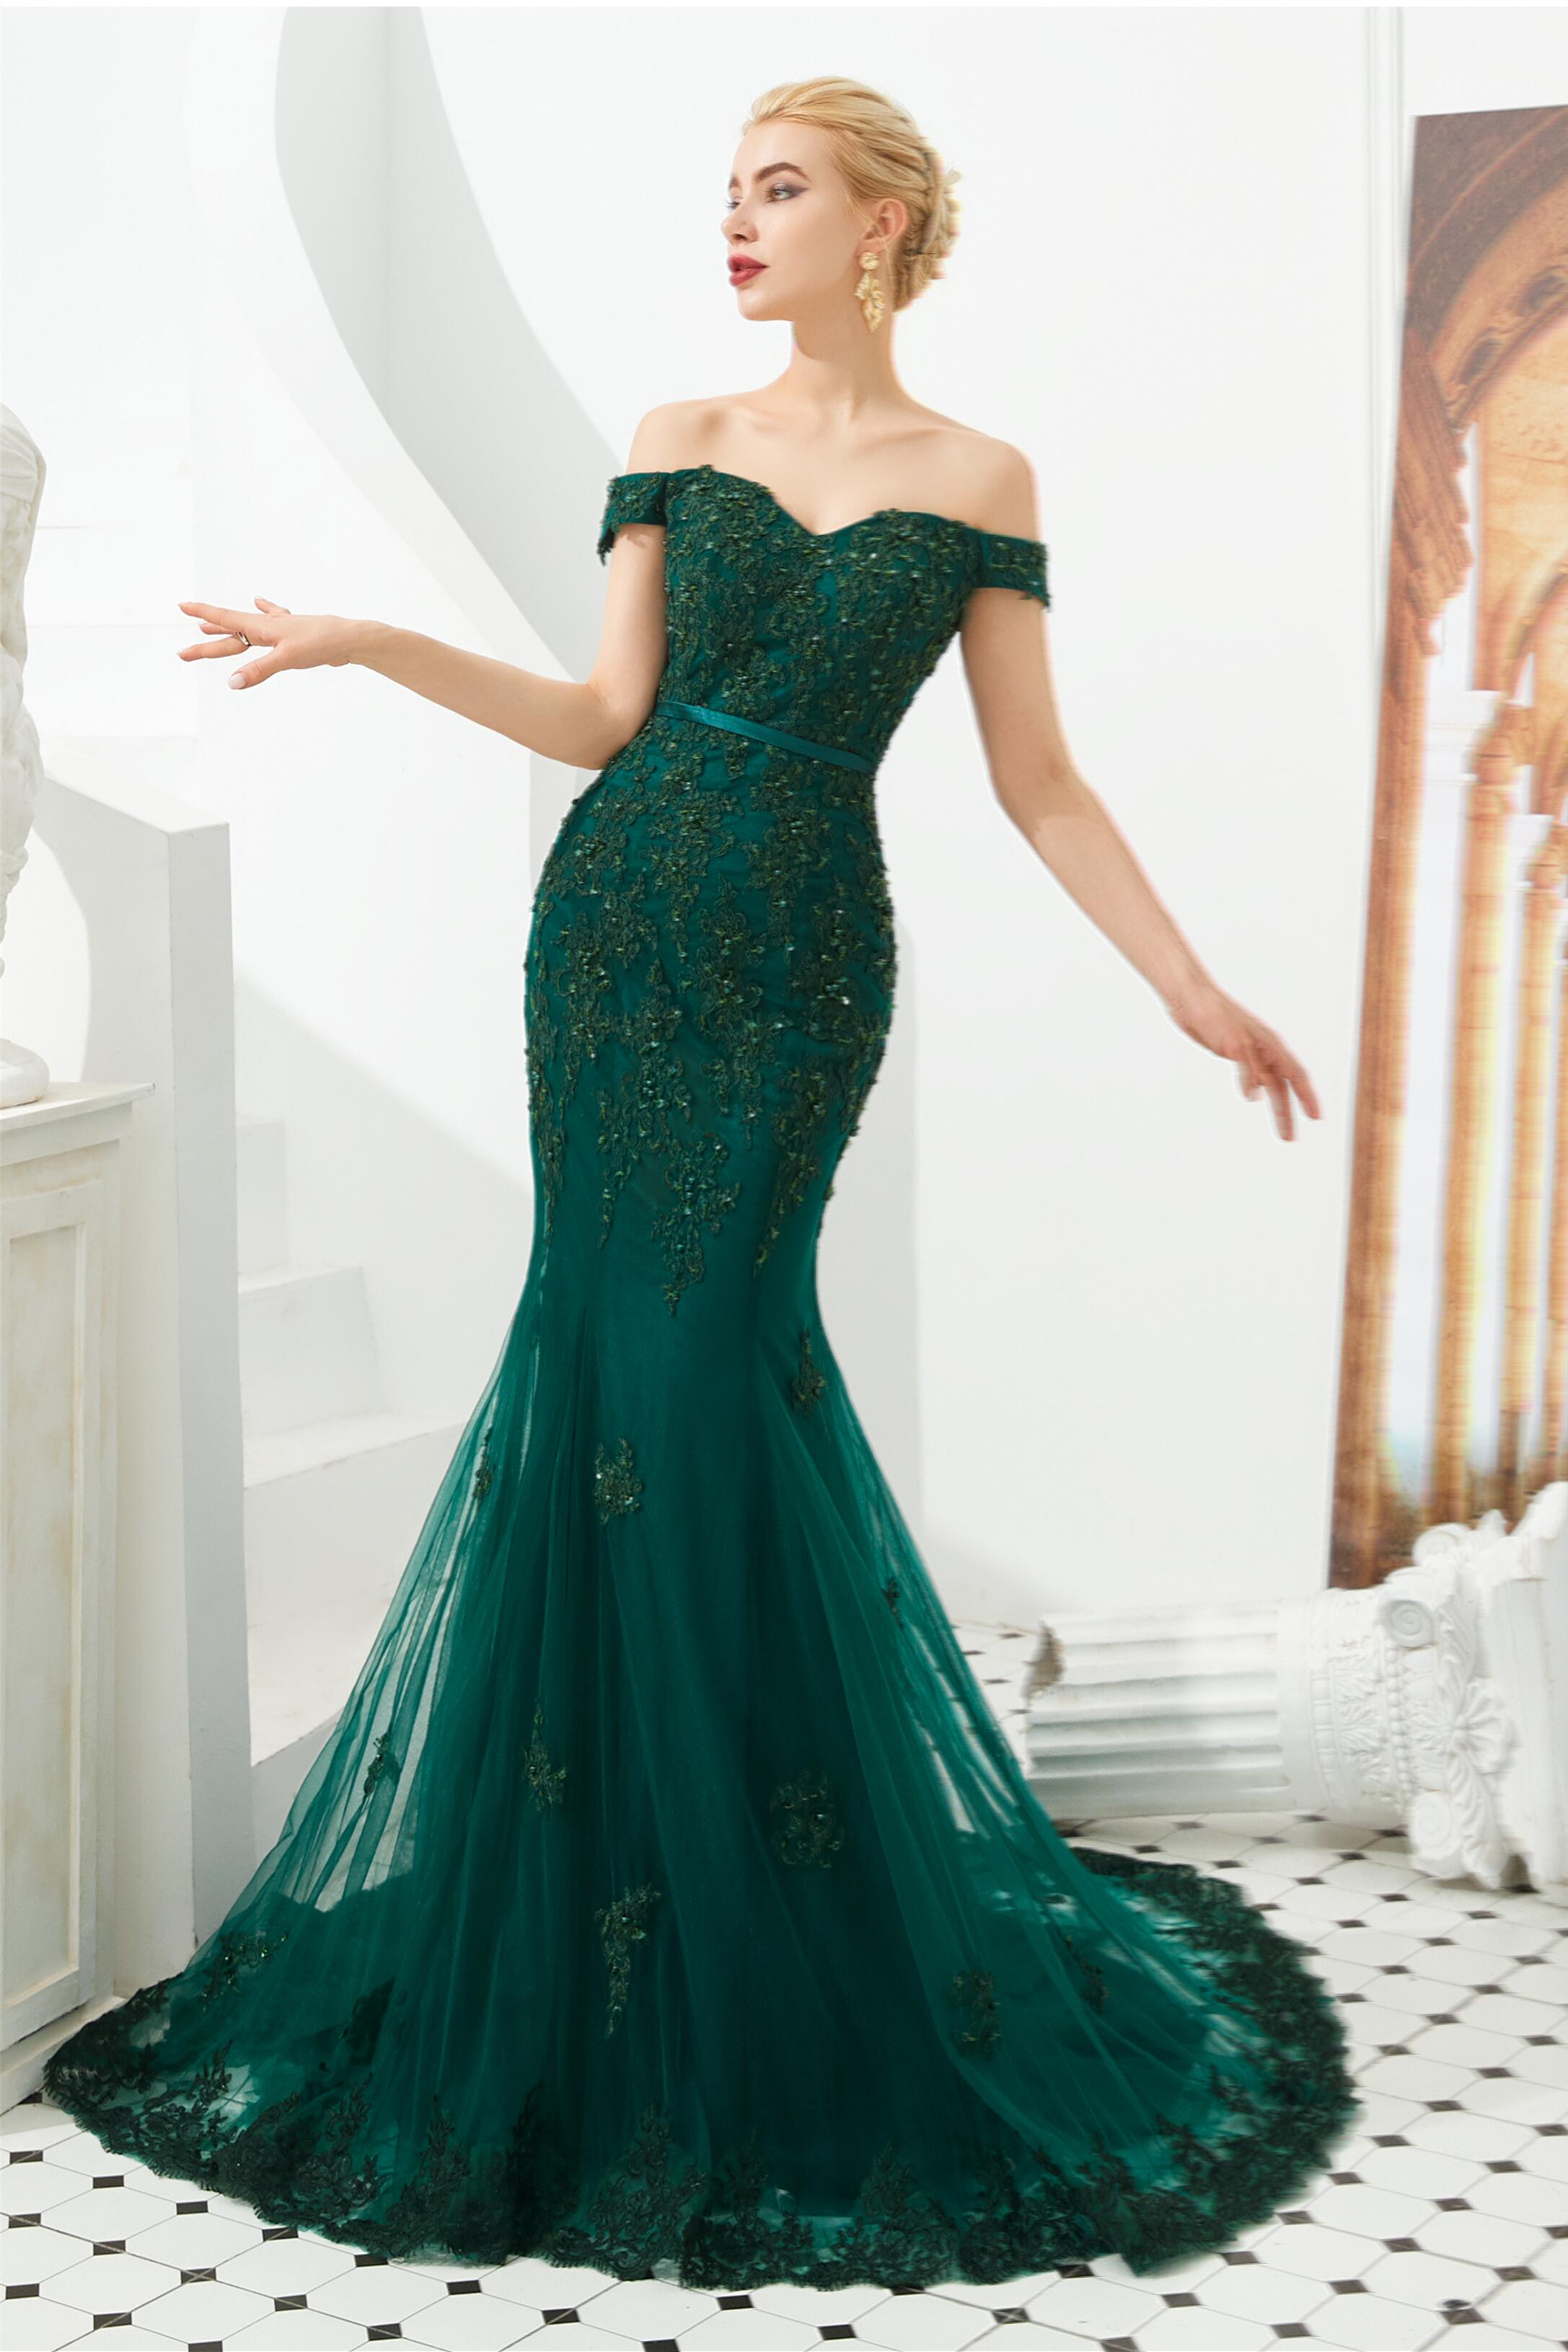 Off Shoulder Mermaid Dark Green Formal Evening Dresses with Lace